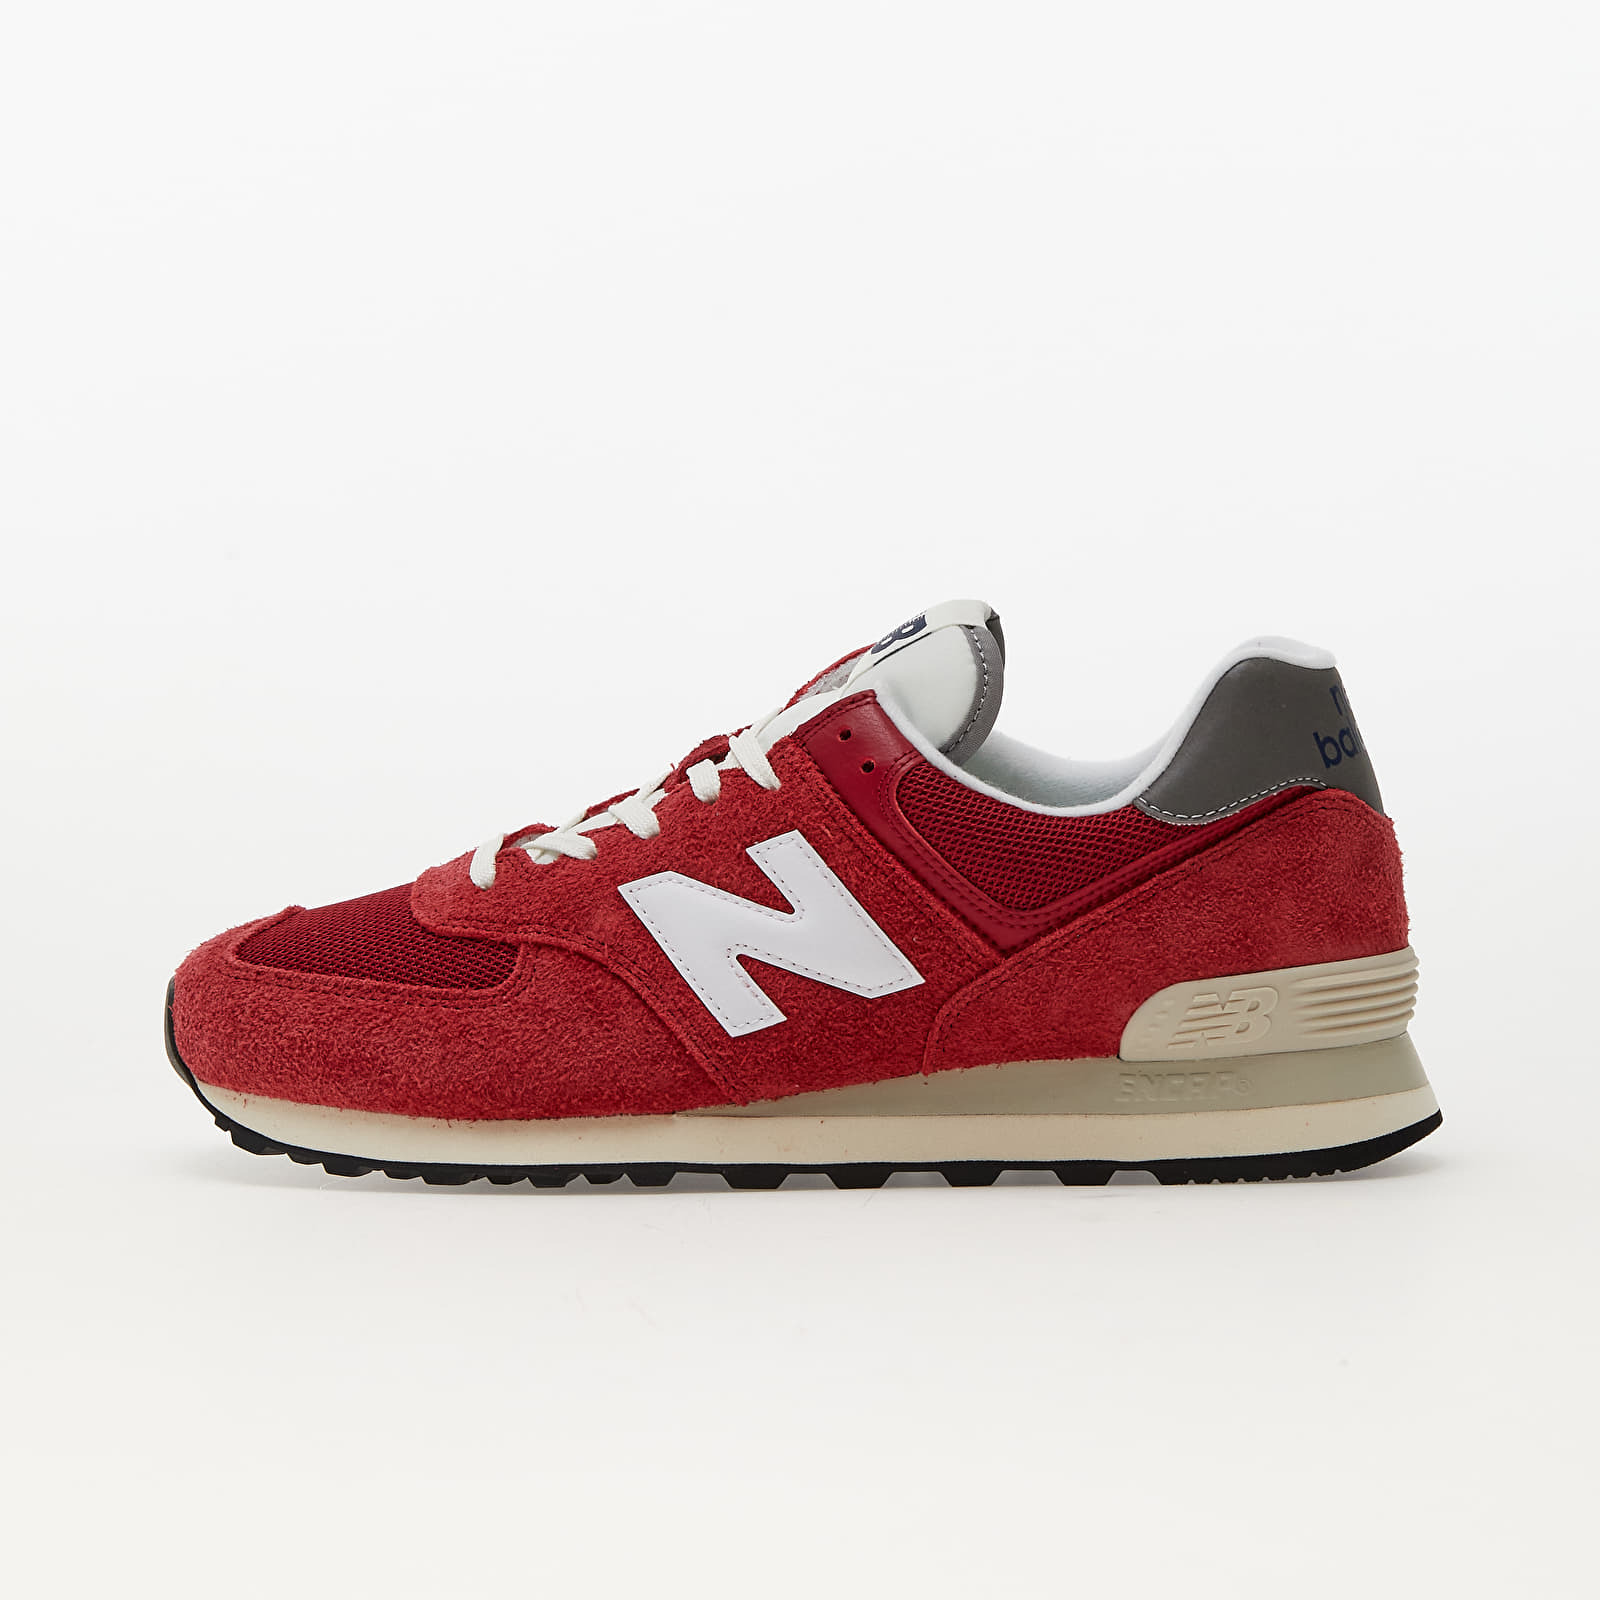 Men's sneakers and shoes New Balance 574 Varsity Red